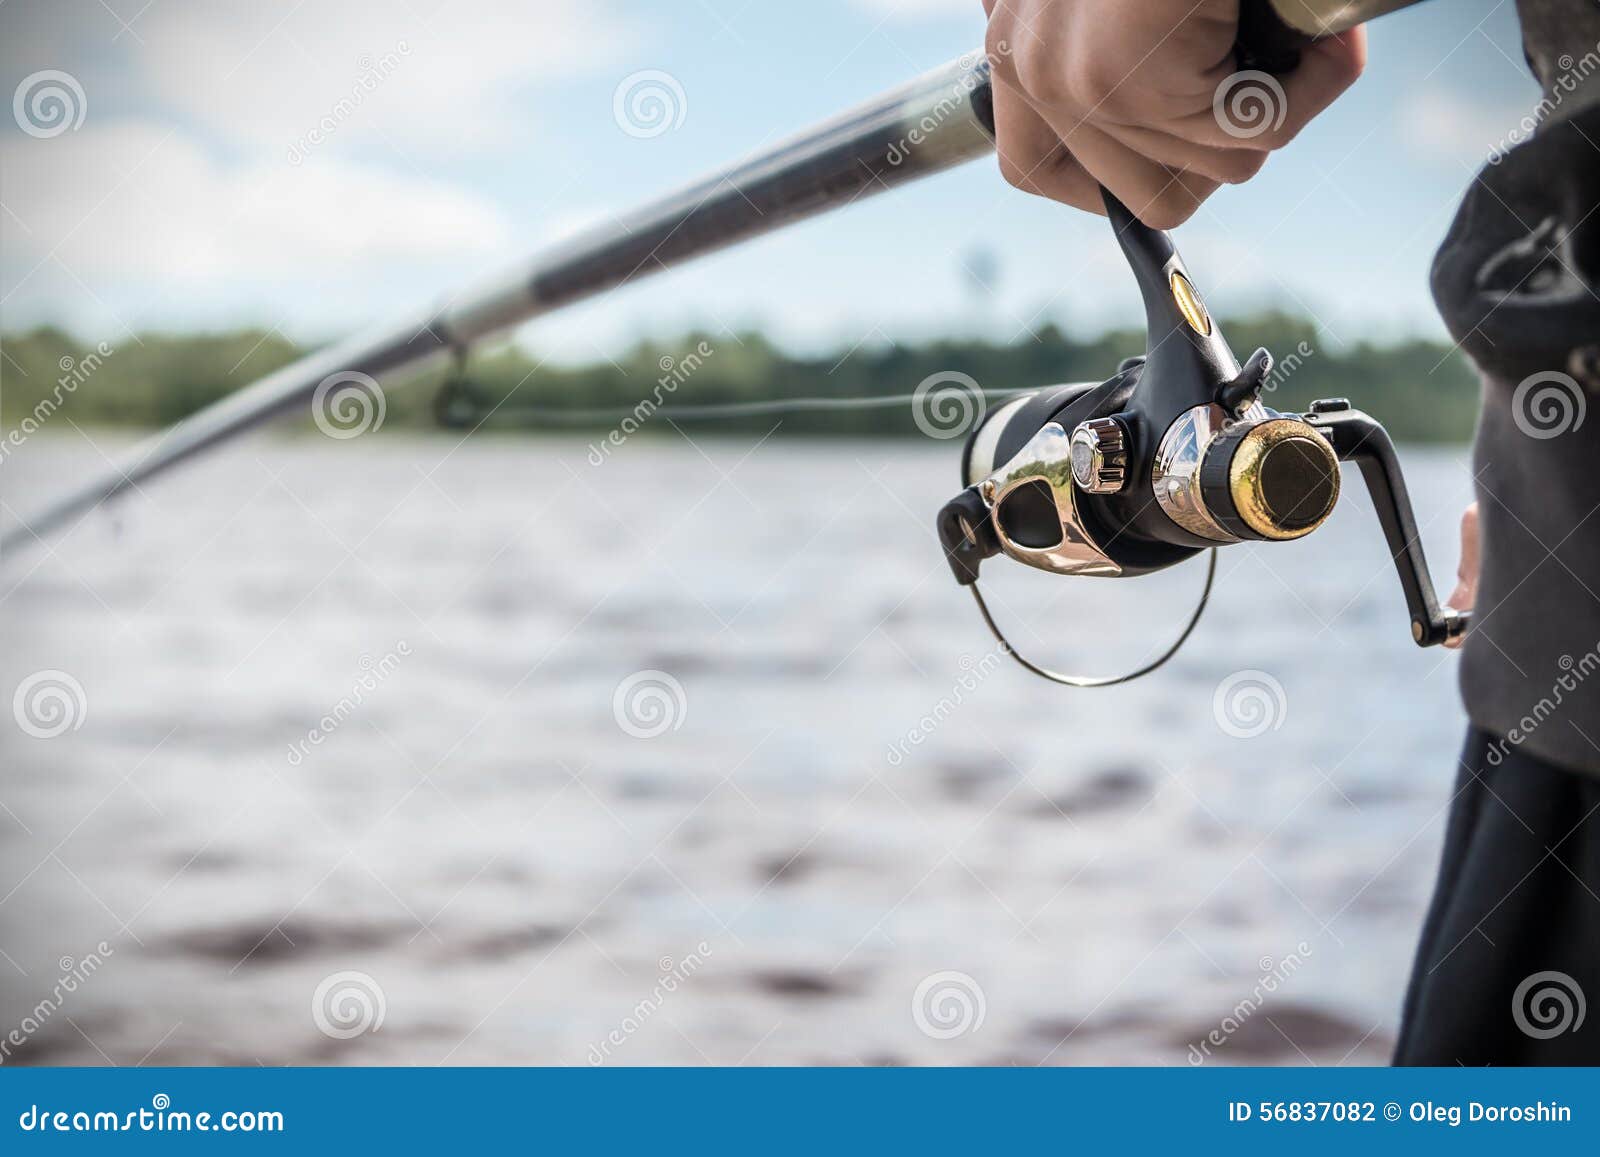 Hand Holding a Fishing Rod with Reel Stock Photo - Image of object